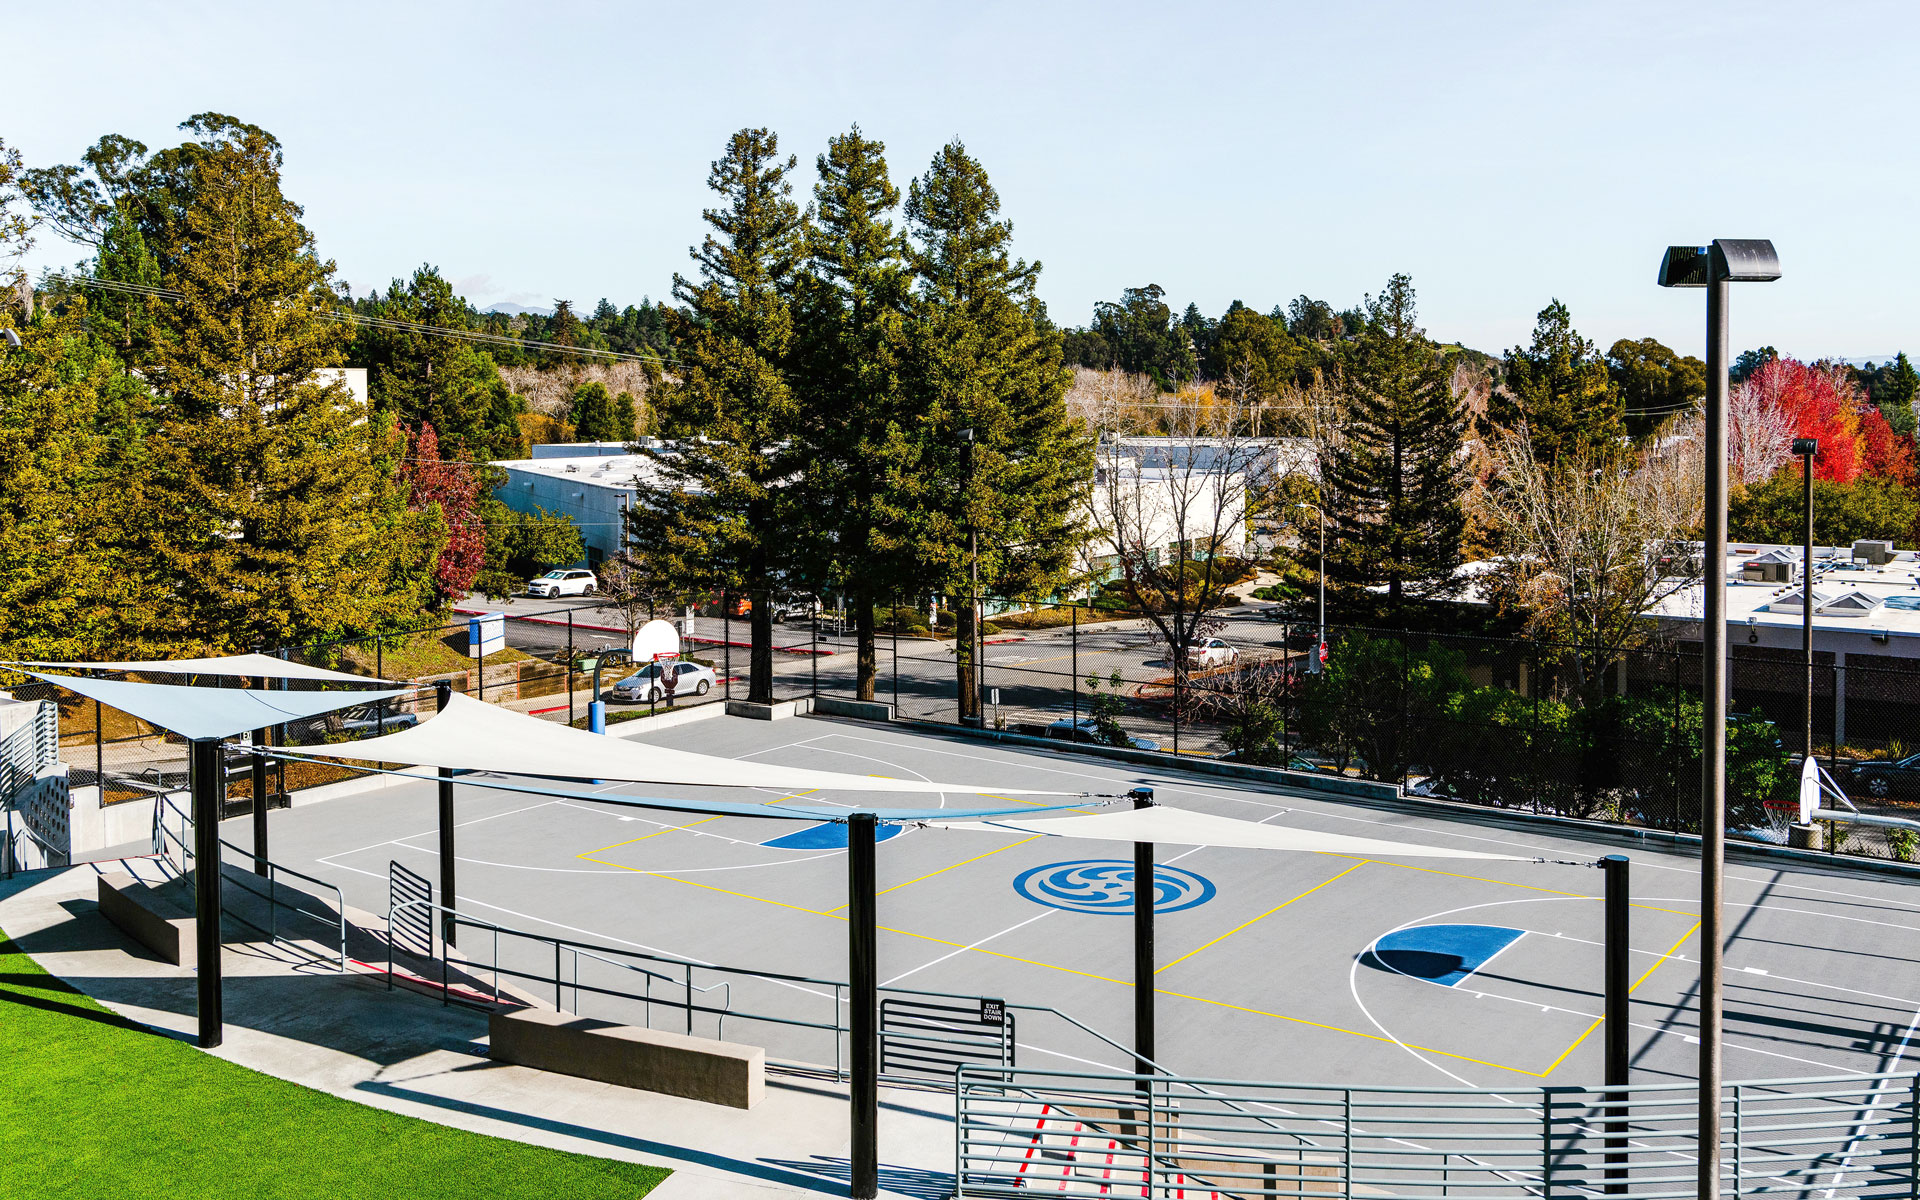 Basketball court and shaded sitting area